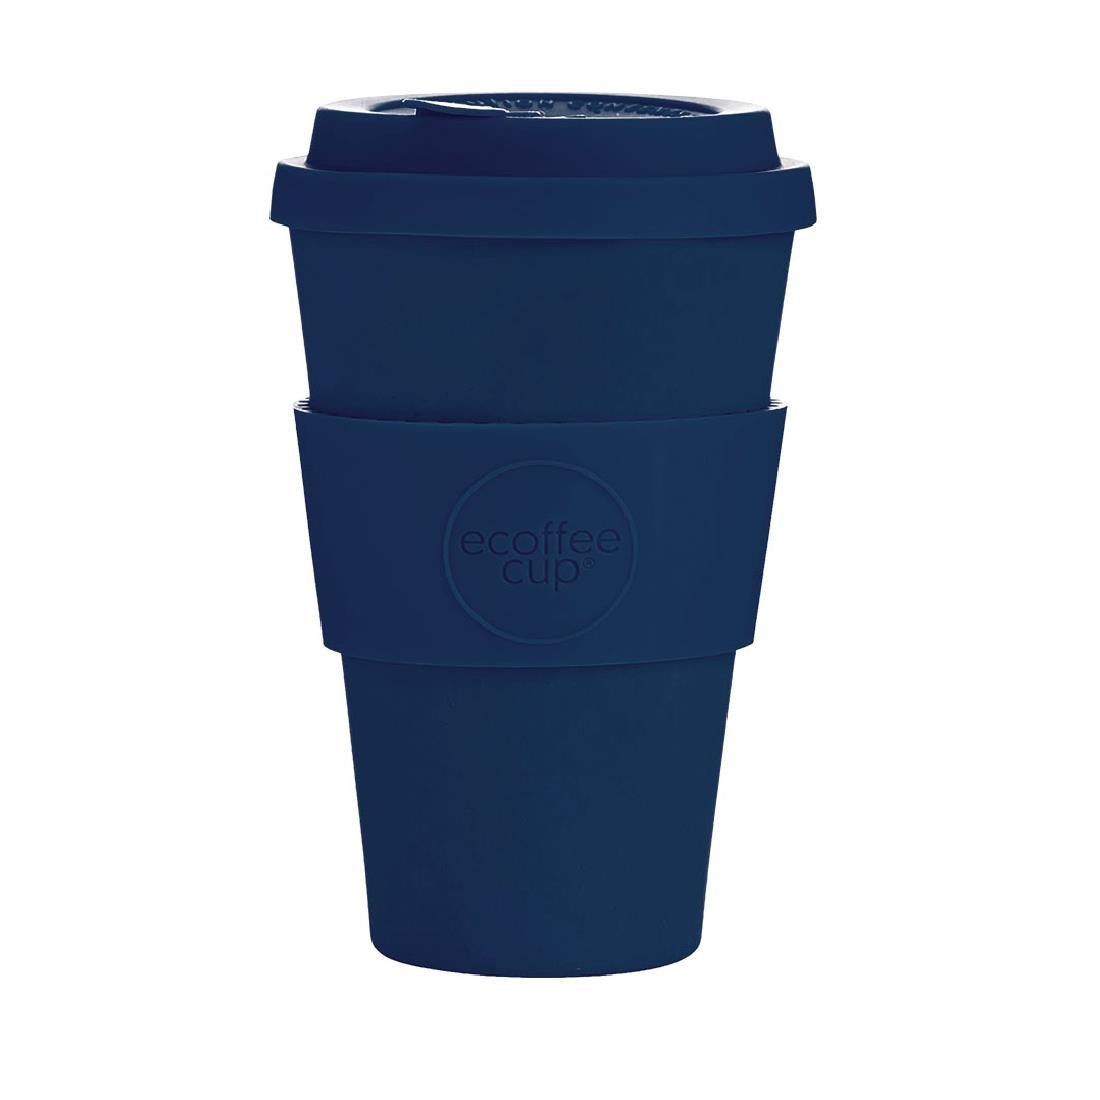 Ecoffee Cup Bamboo Reusable Coffee Cup Dark Energy Navy 14oz - DY492  - 1